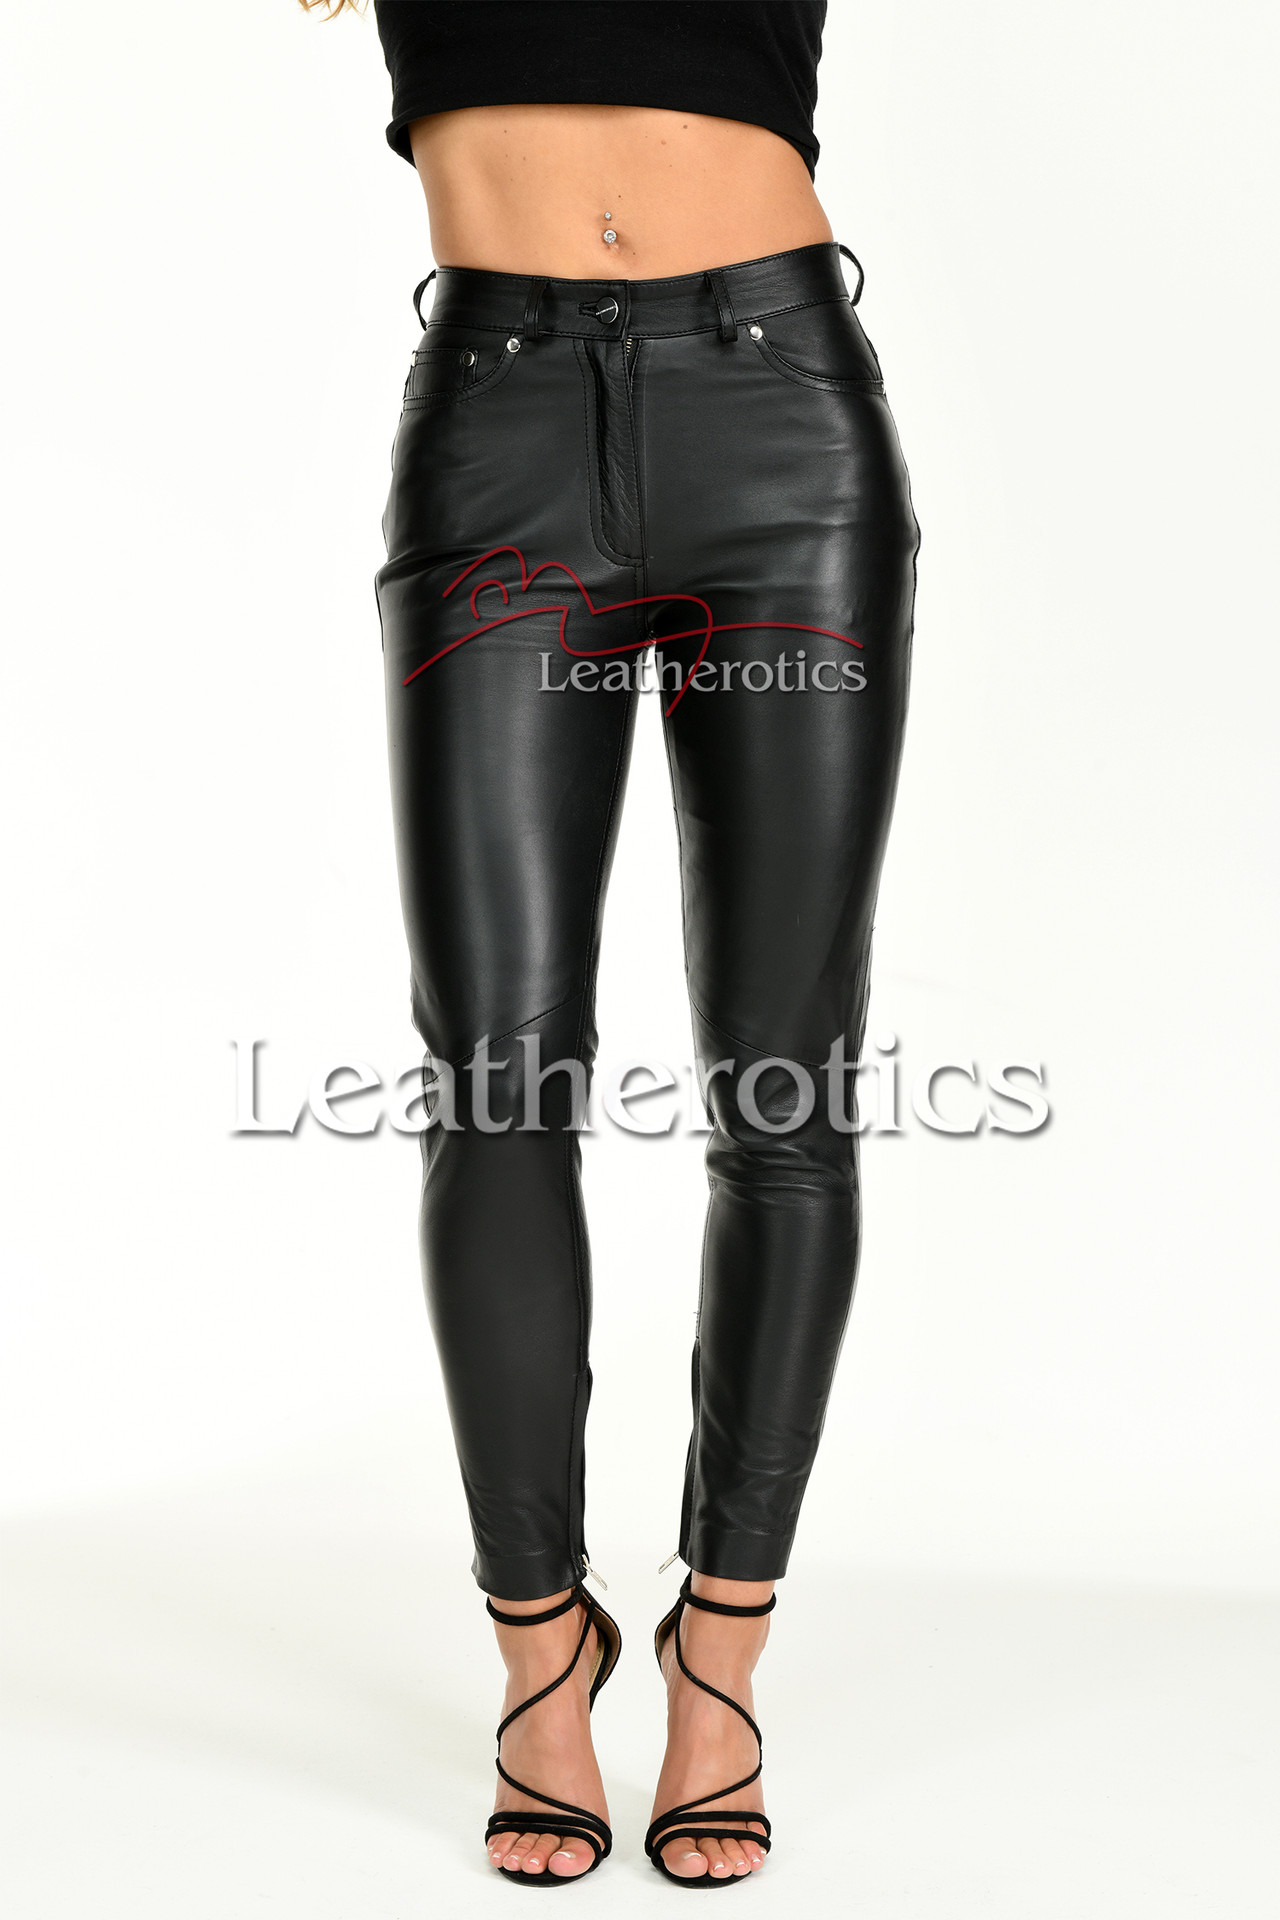 https://cdn11.bigcommerce.com/s-0d59c/images/stencil/1280x2500/products/595/4119/tight-leather-trousers-with-ankle-zip__36824.1602339379.jpg?c=2?imbypass=on